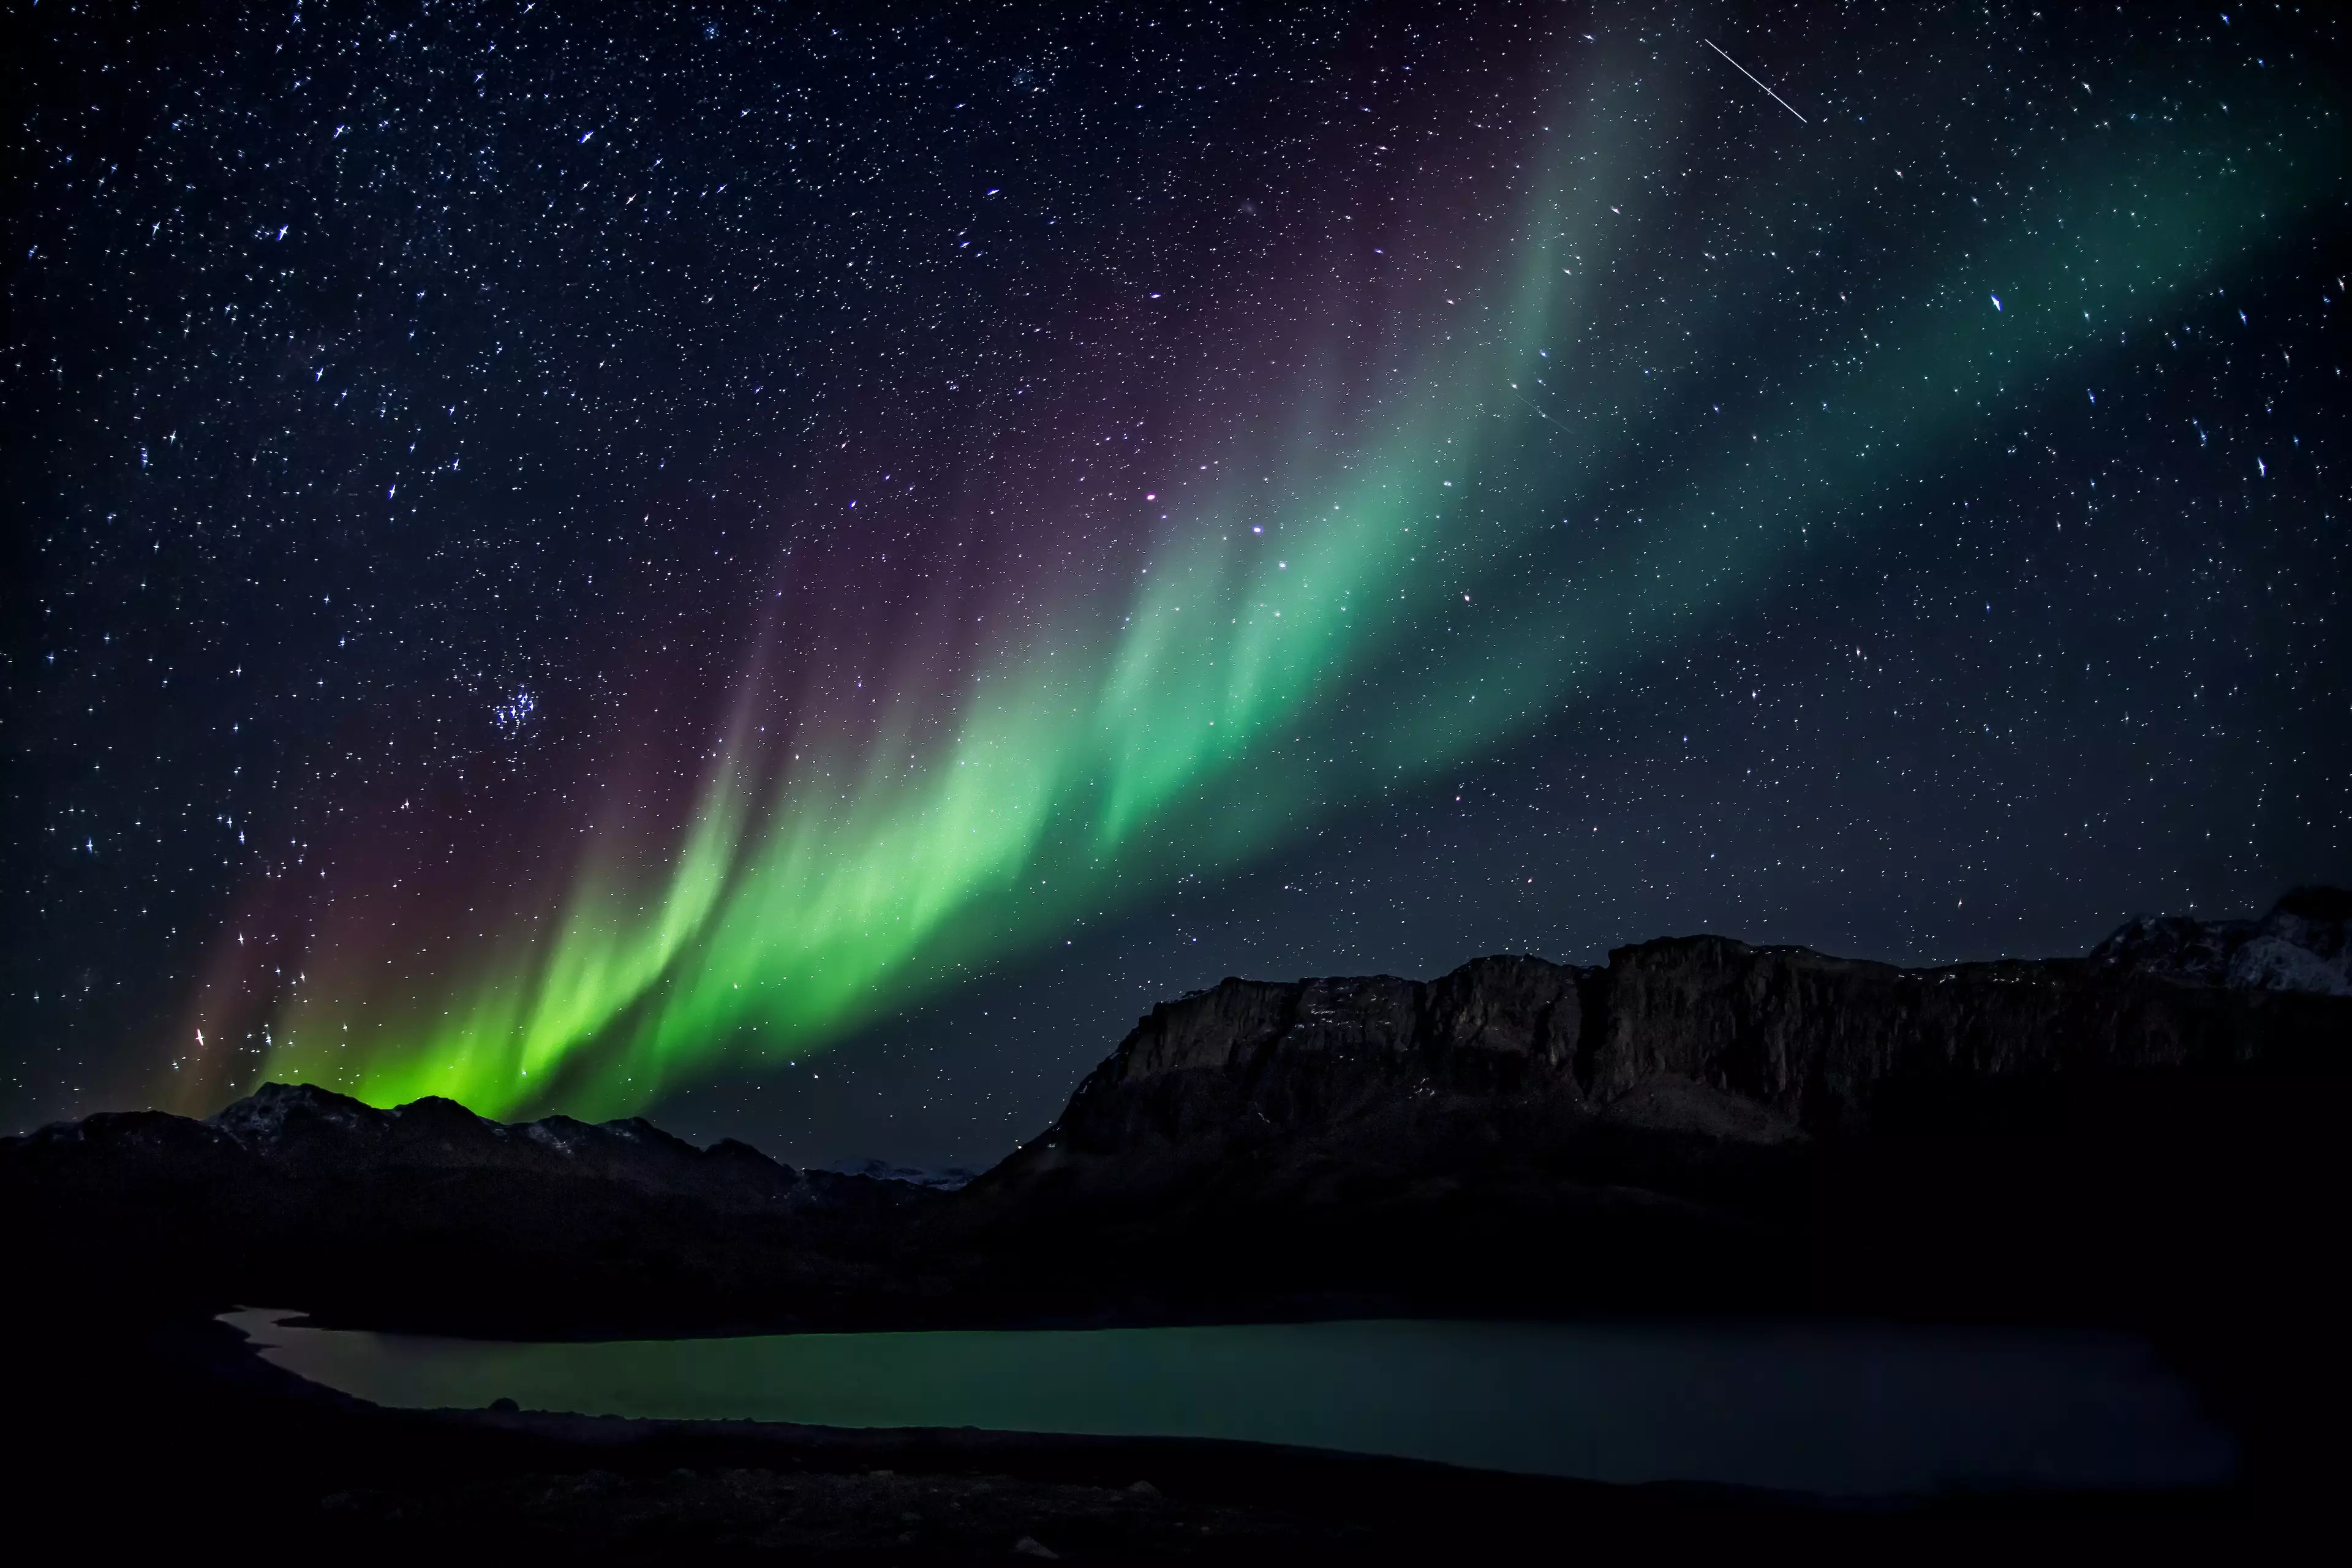 Northern lights pictured in Greenland (